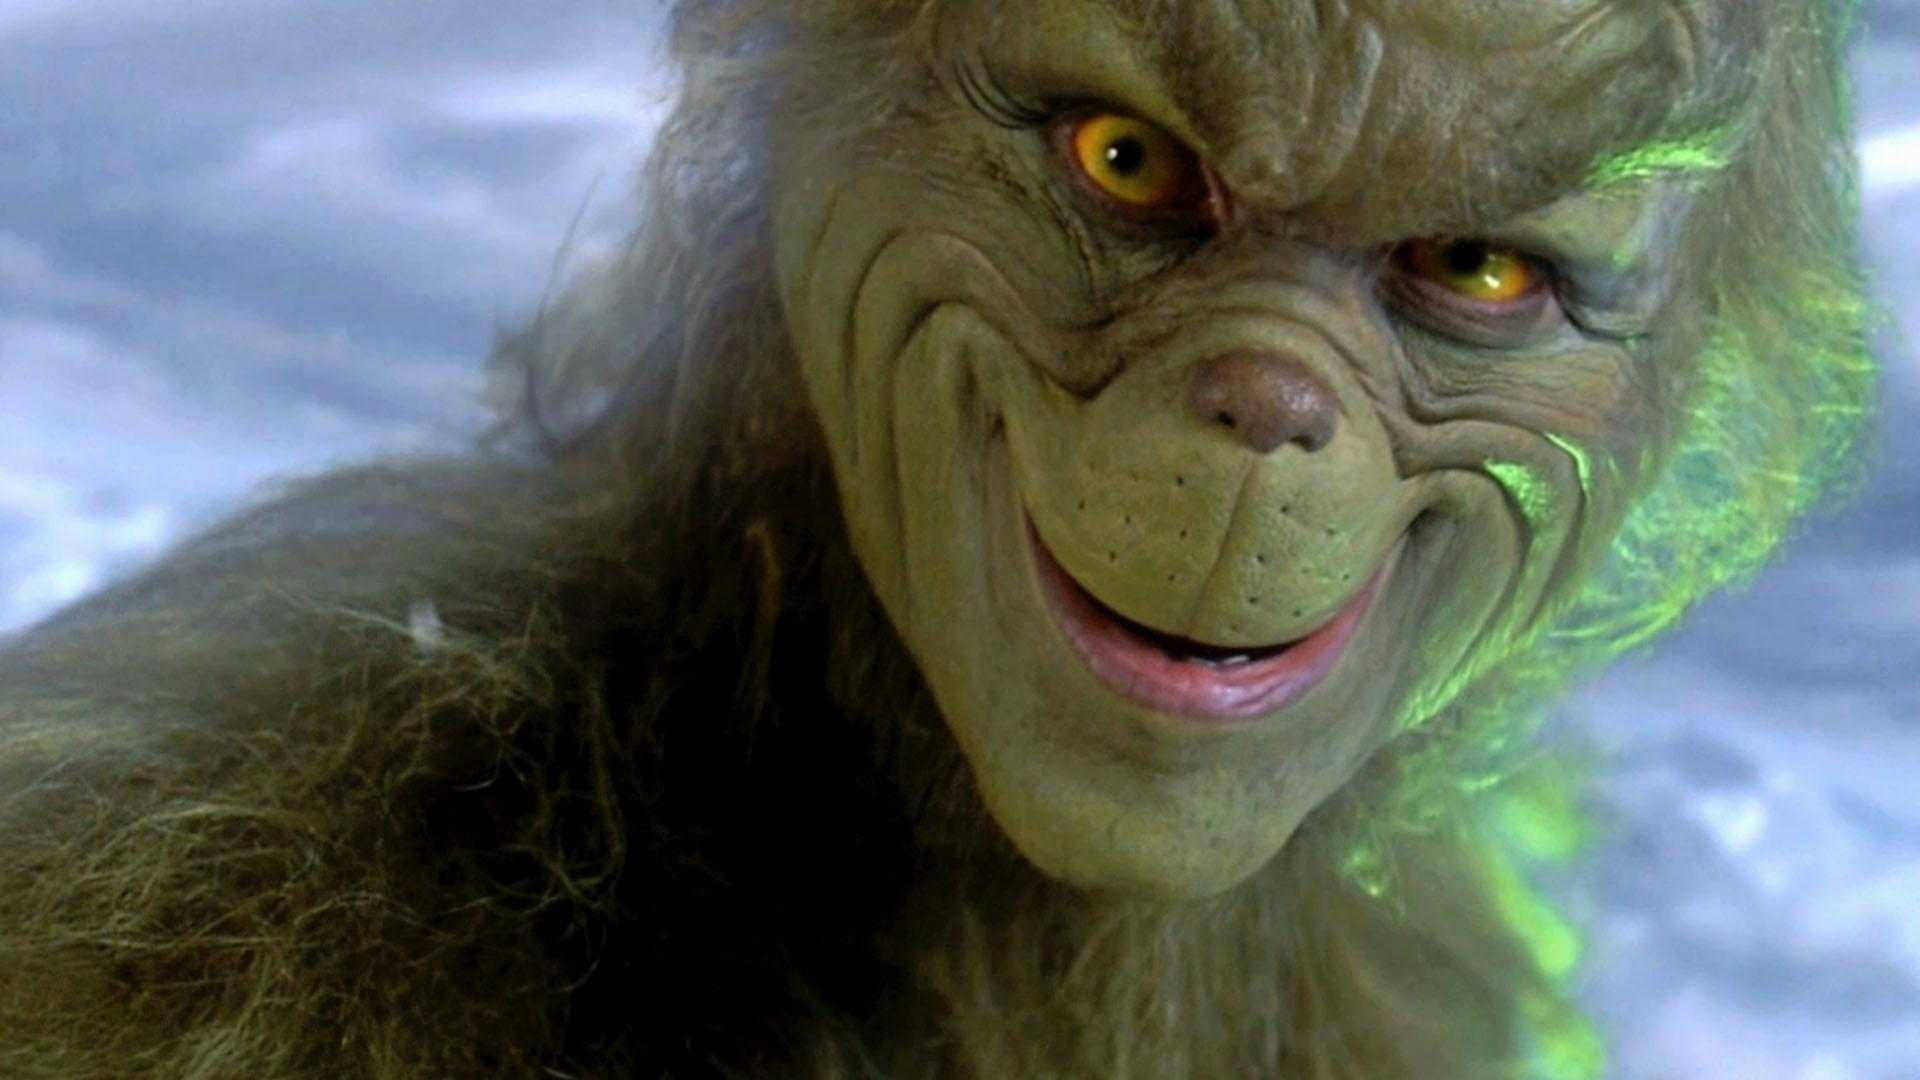 Grinch Scary Face Wallpaper